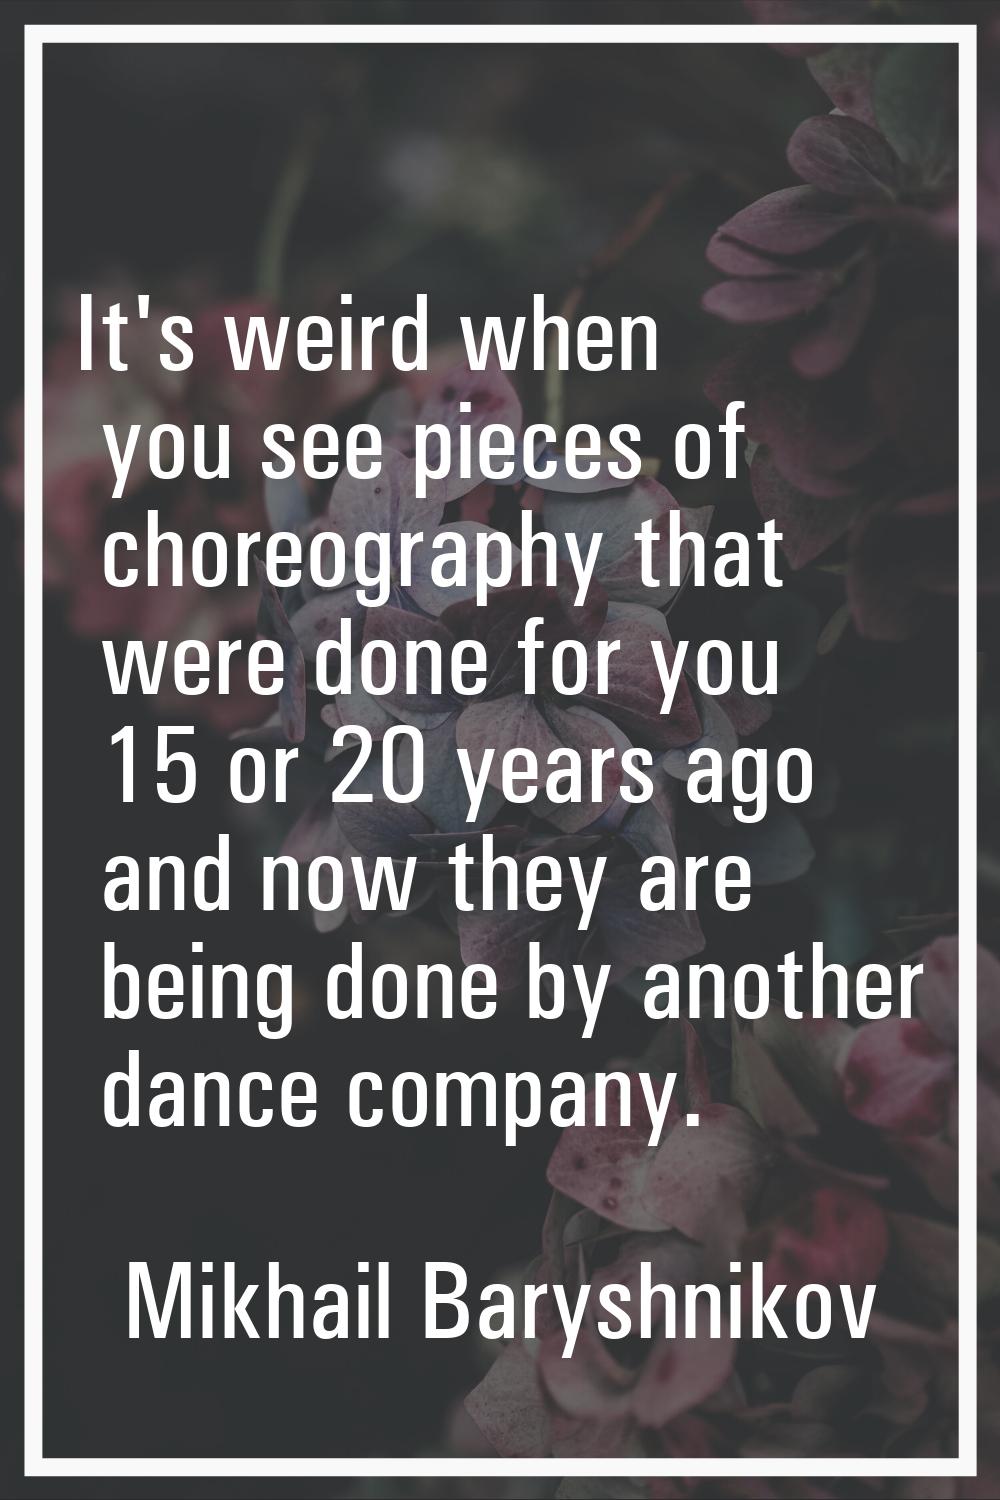 It's weird when you see pieces of choreography that were done for you 15 or 20 years ago and now th